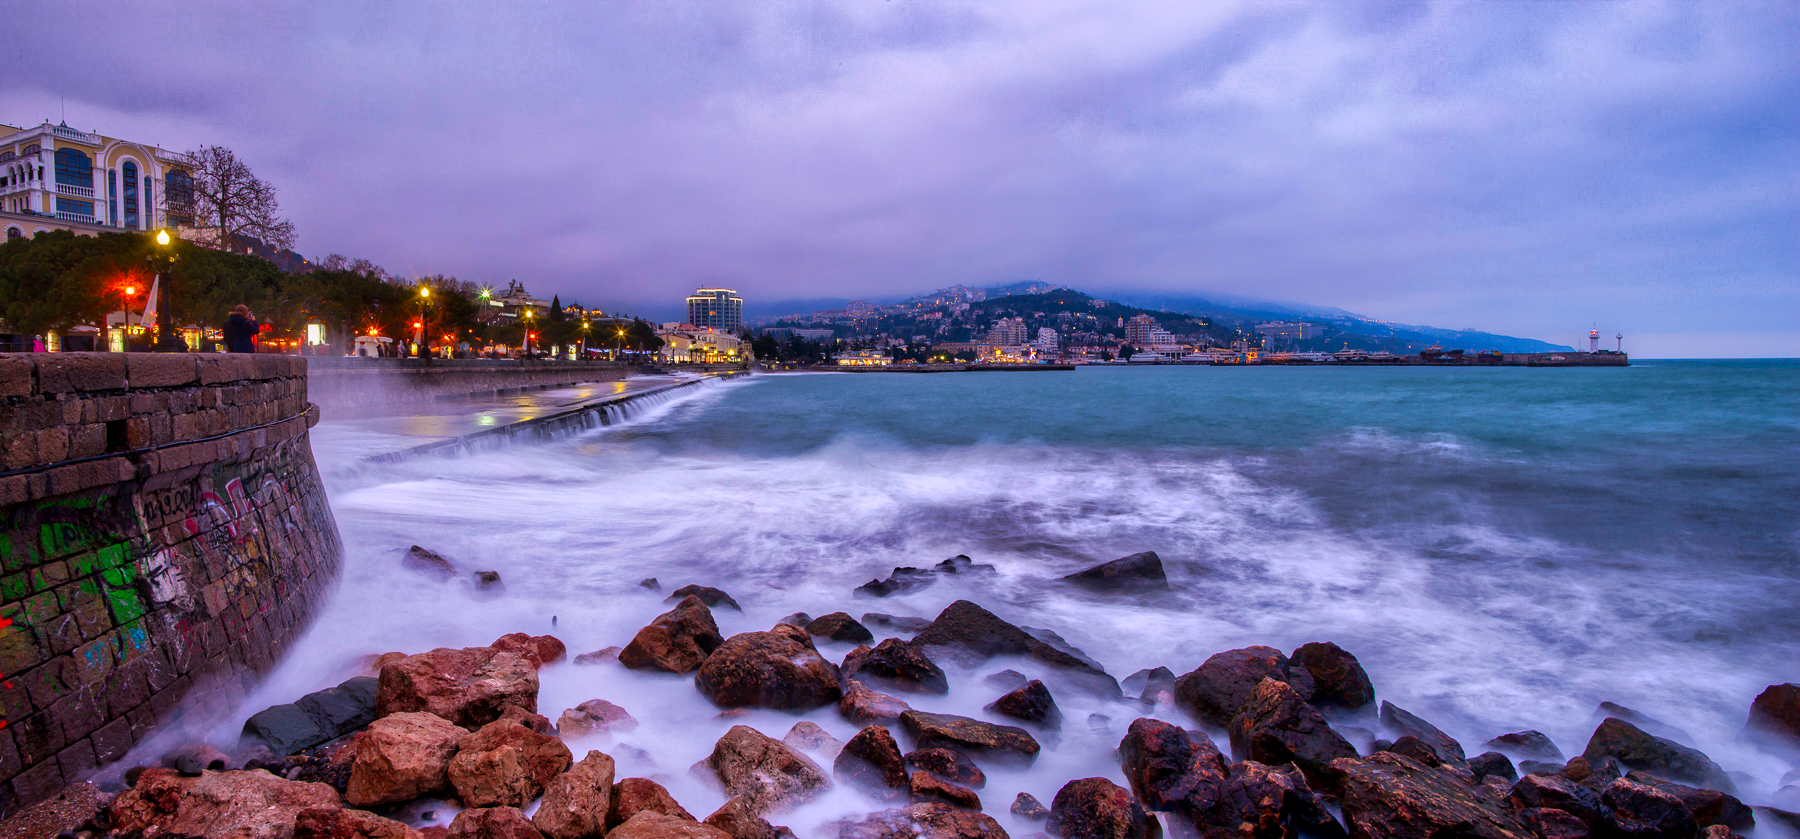 Sea Outdoors Rocks Waves Night Lights Clouds Sky Photography Urban HDR 1800x839